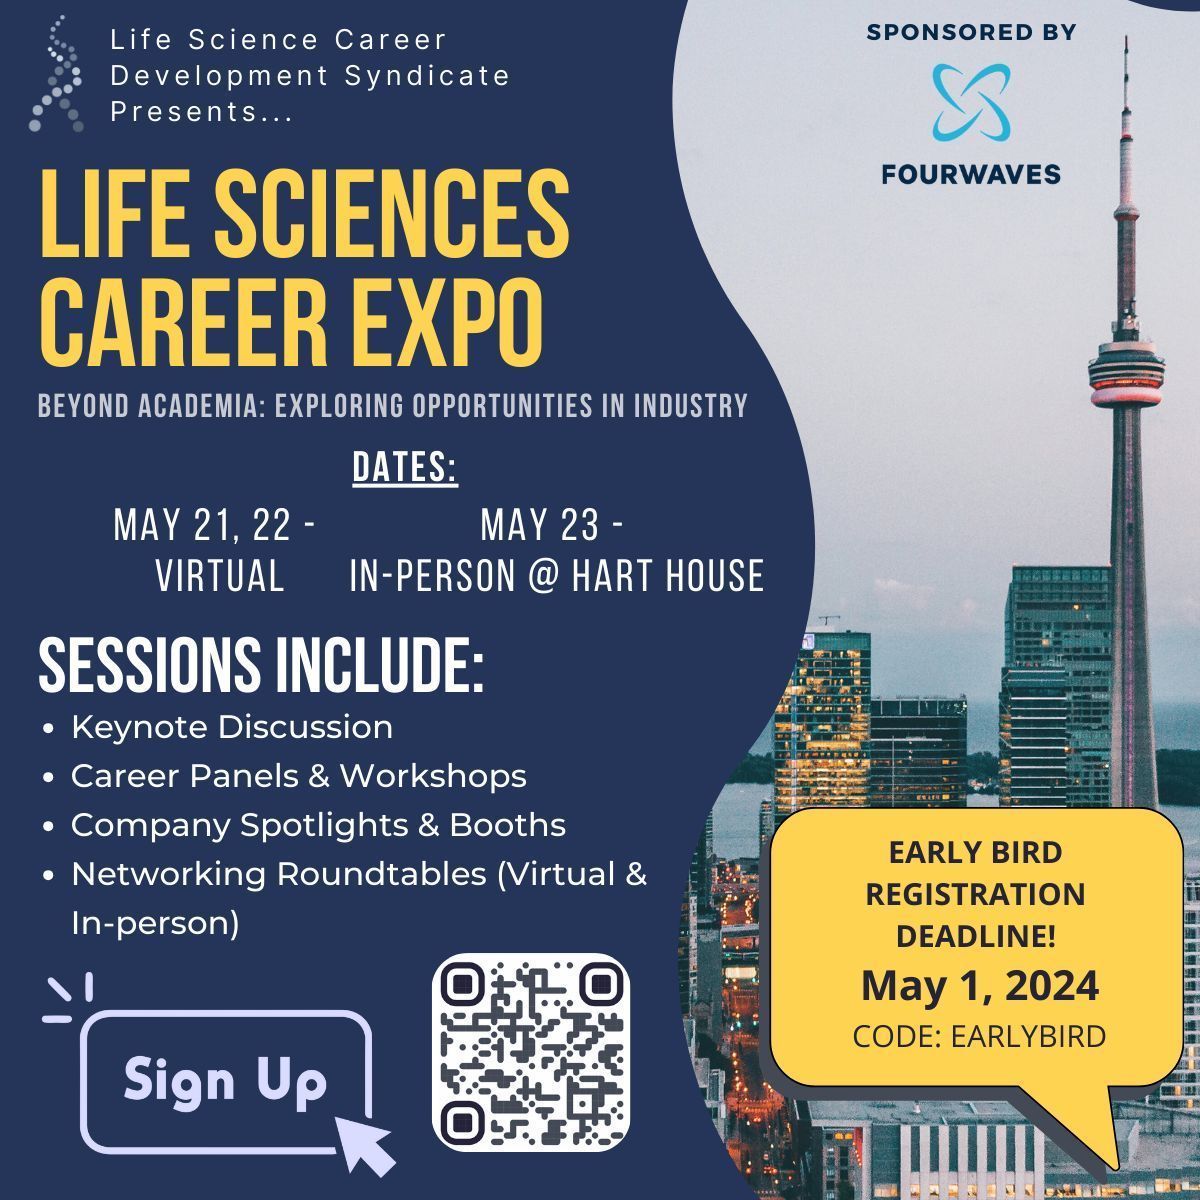 ONLY 24 HRS LEFT for EARLY BIRD discount! Scan the QR code ⇩ or visit our website to register. LSCDS is excited for another installment of the Life Sciences Career Expo (LSCE), taking place from May 21-23, 2024. Website: buff.ly/43FBFox